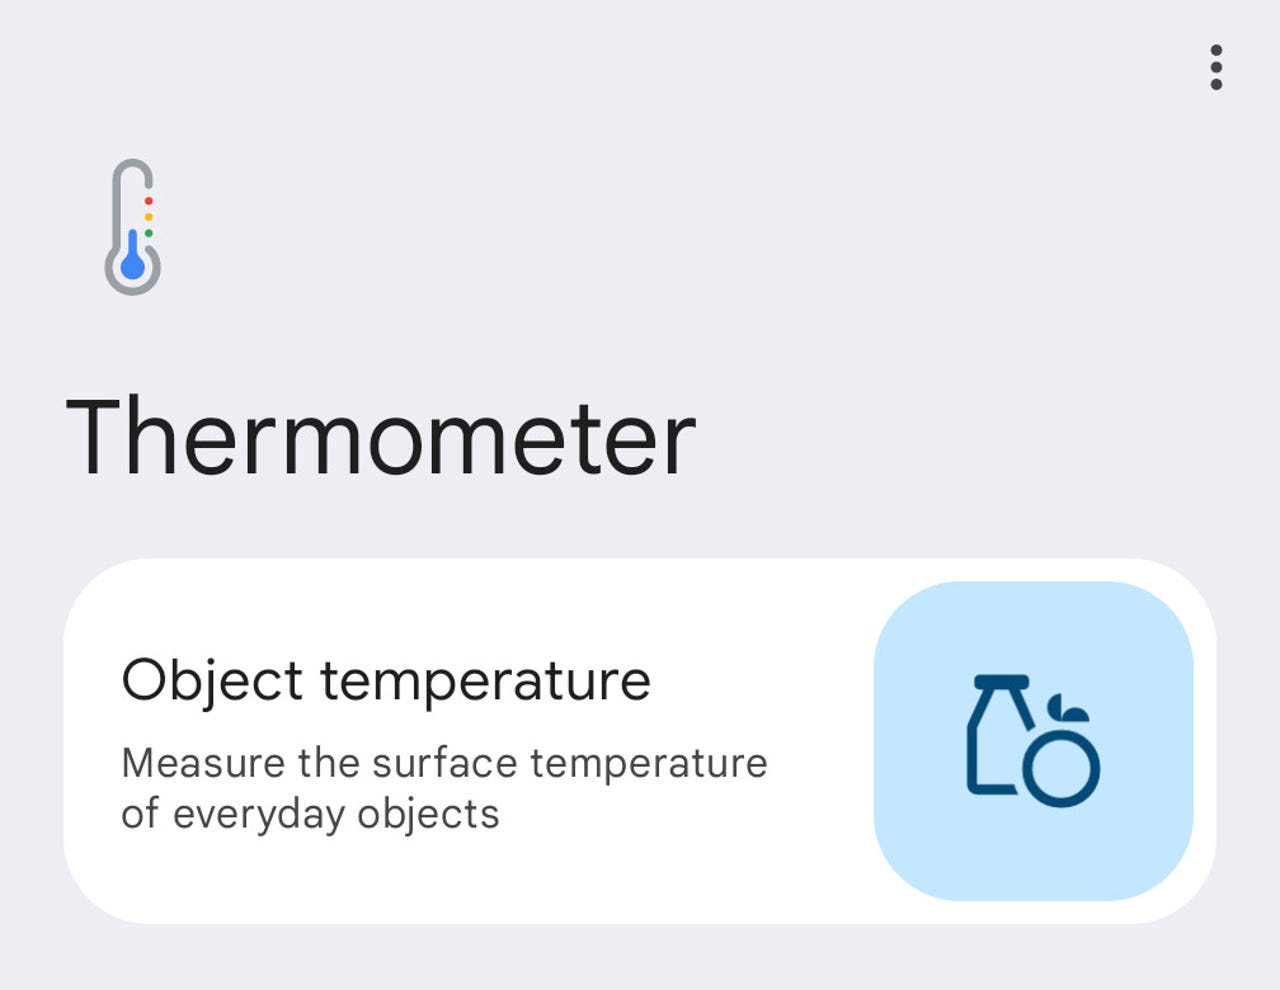 Thermometer Apps: How to Check Temperature With iPhone